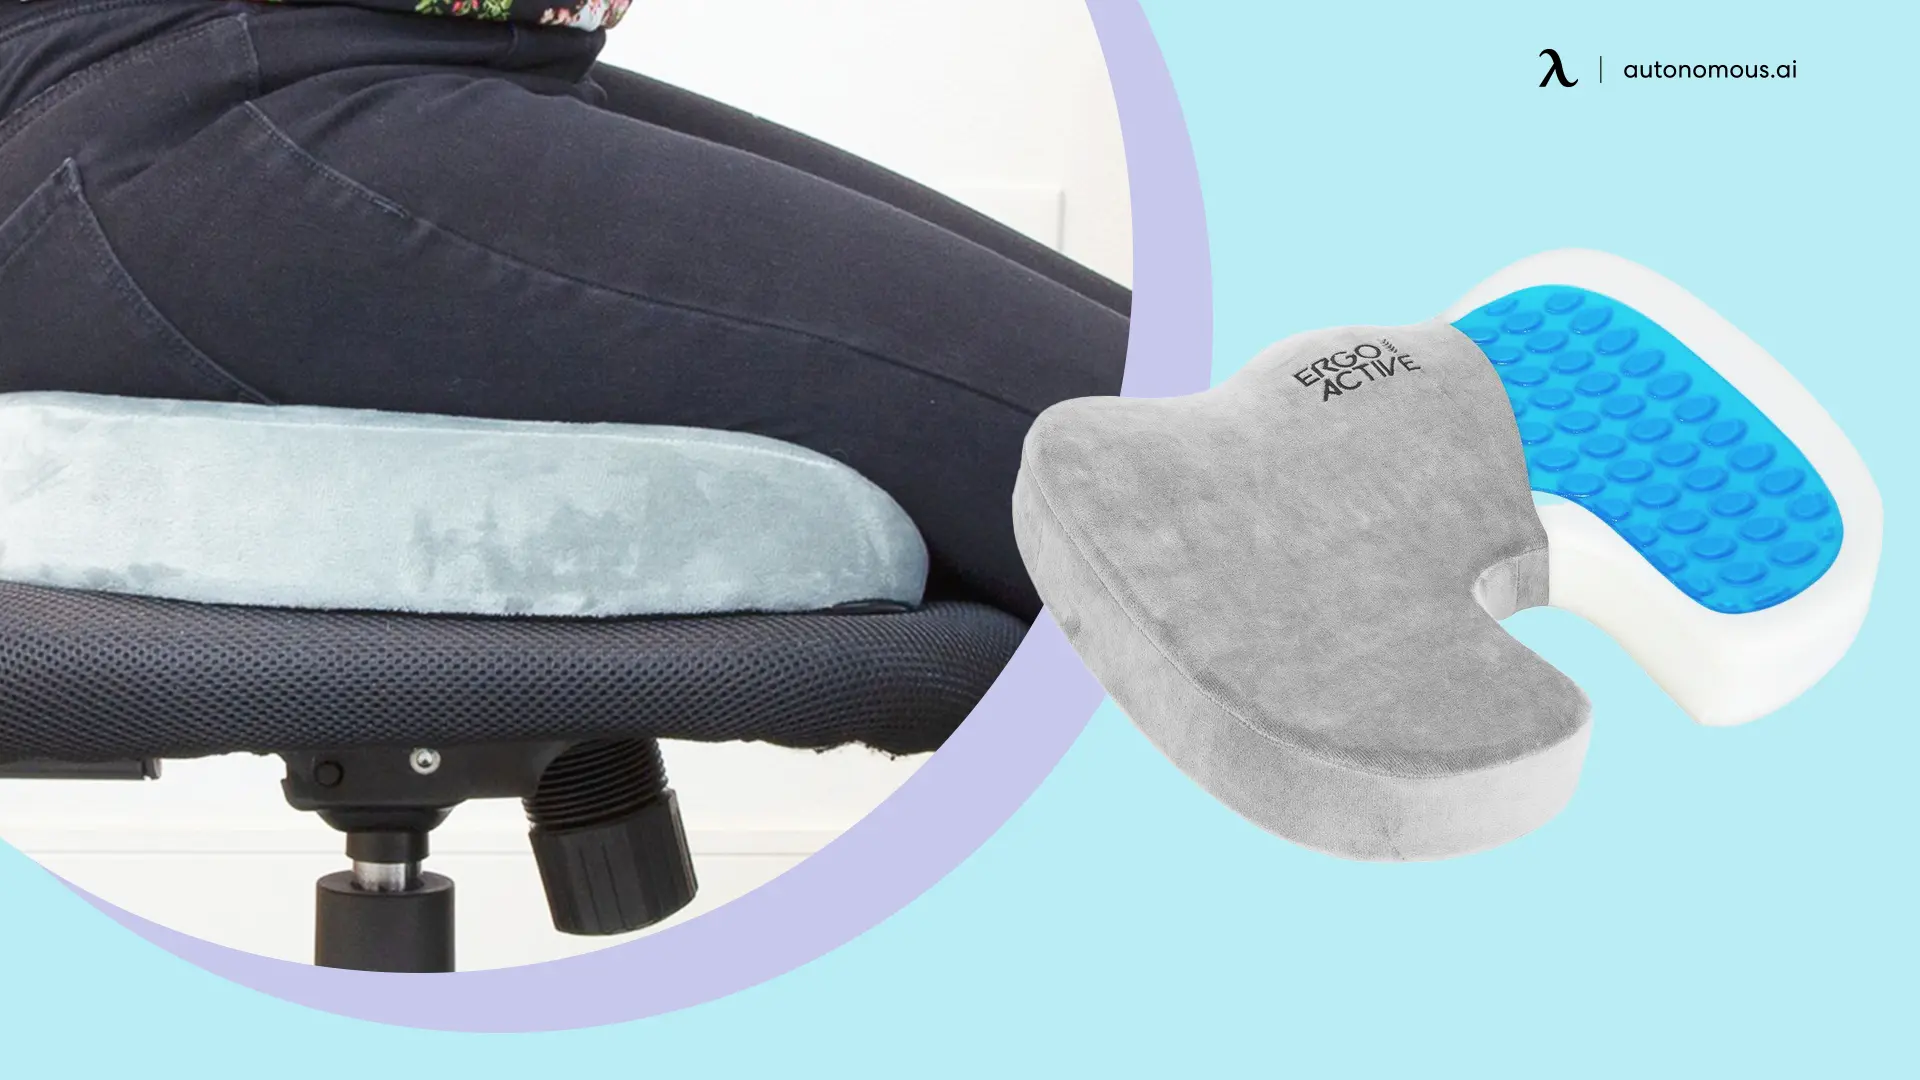 Features to Consider When Choosing a Seat Cushion